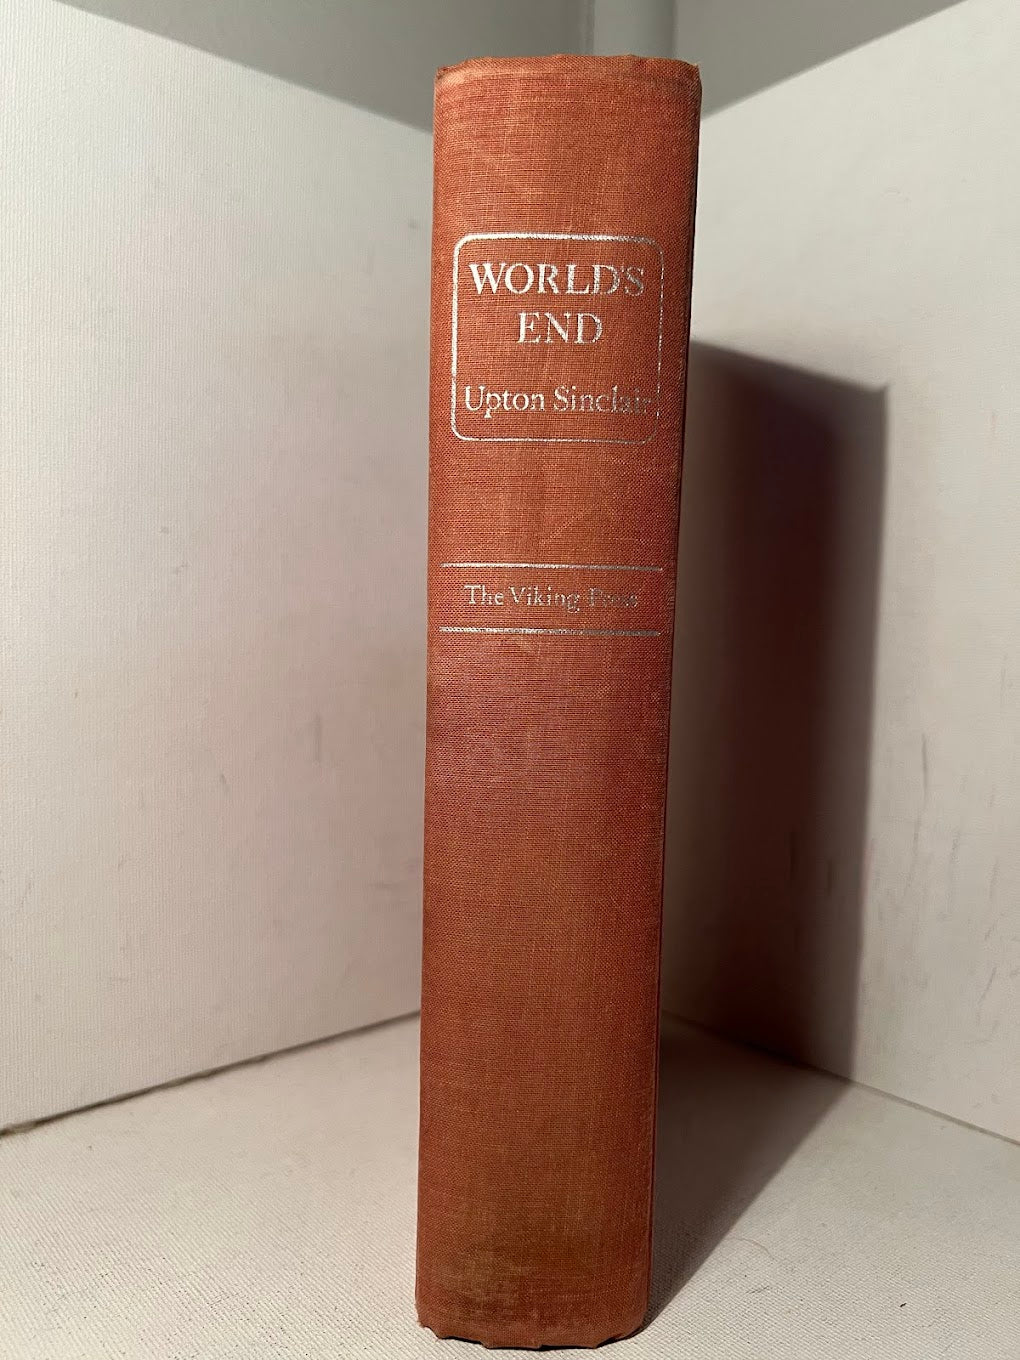 World's End by Upton Sinclair